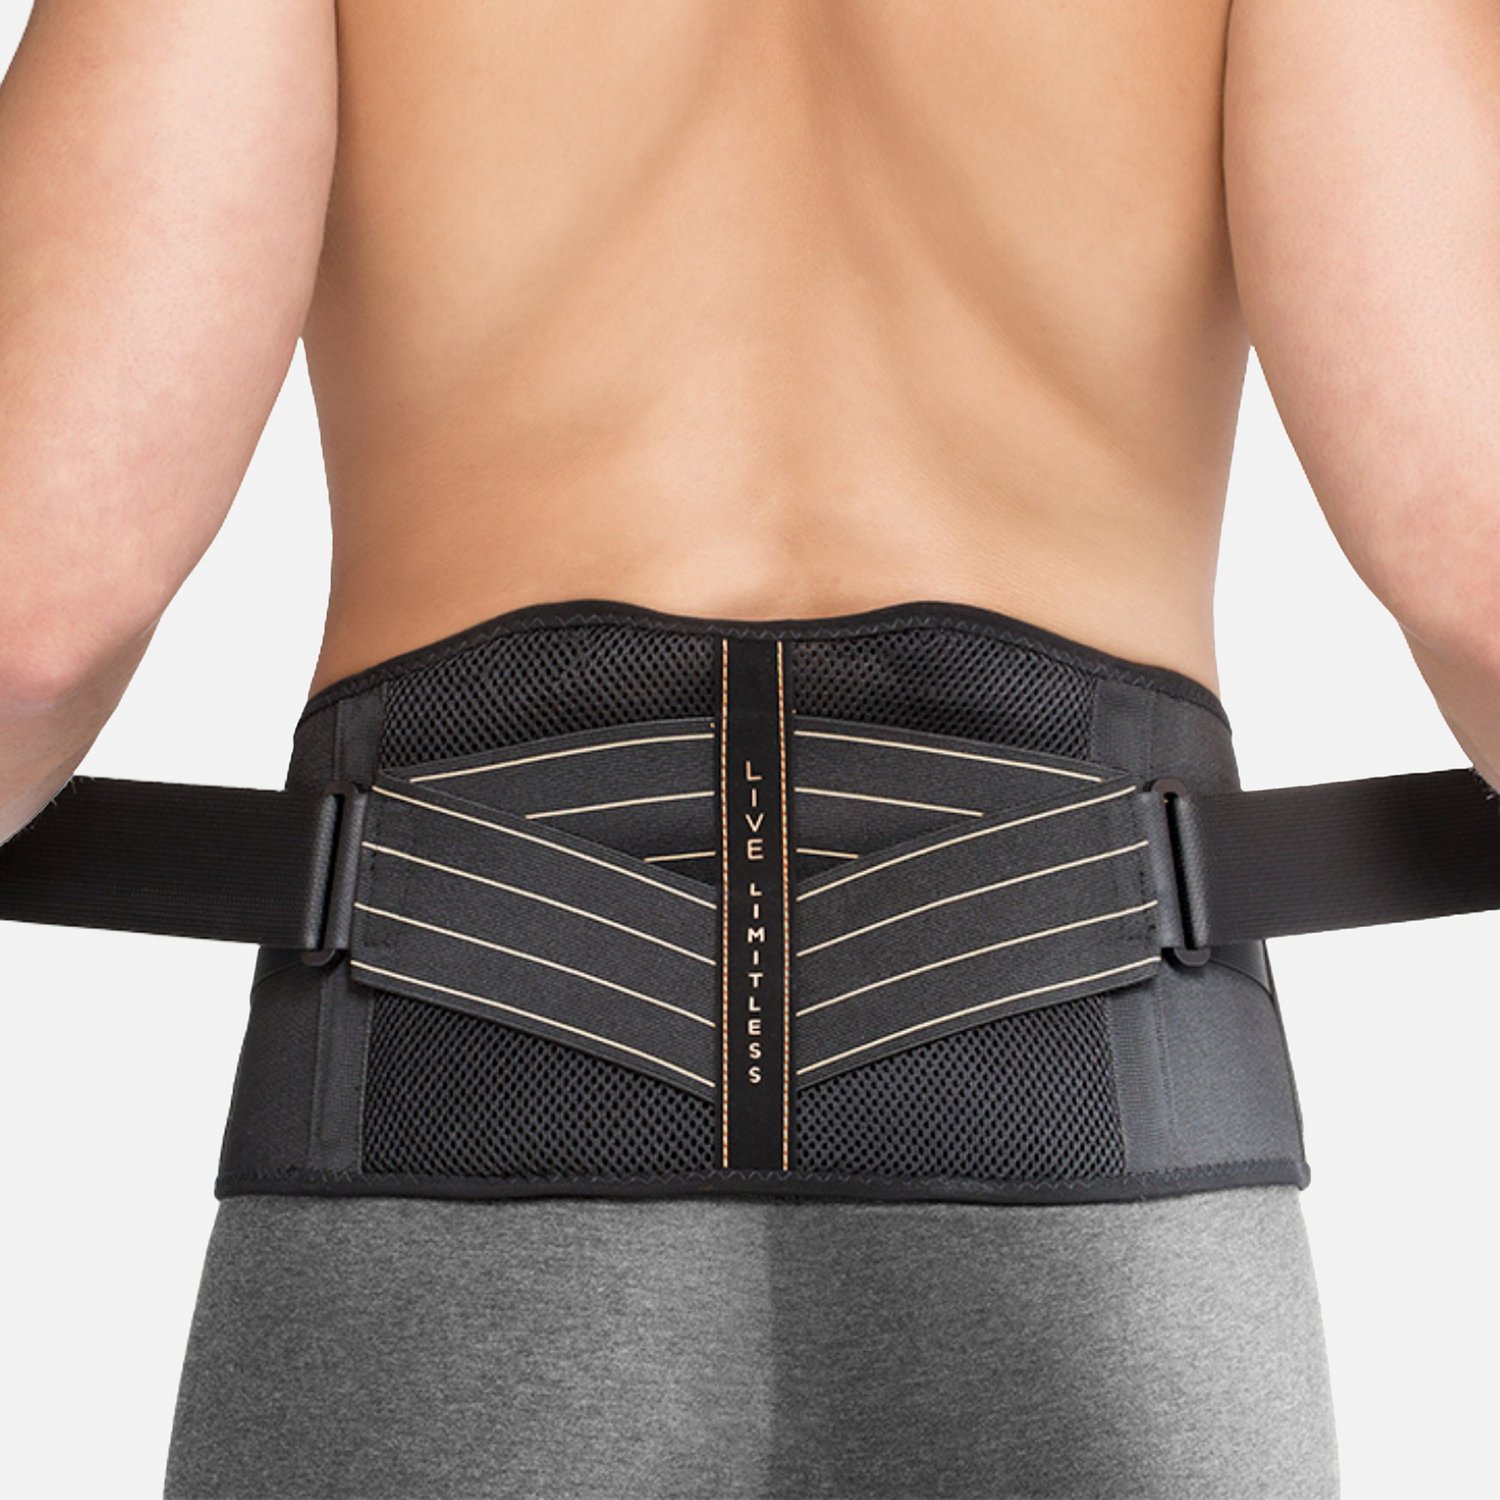 Tommie Copper Comfort Fit Back Pain Support Brace Copper Infused Support